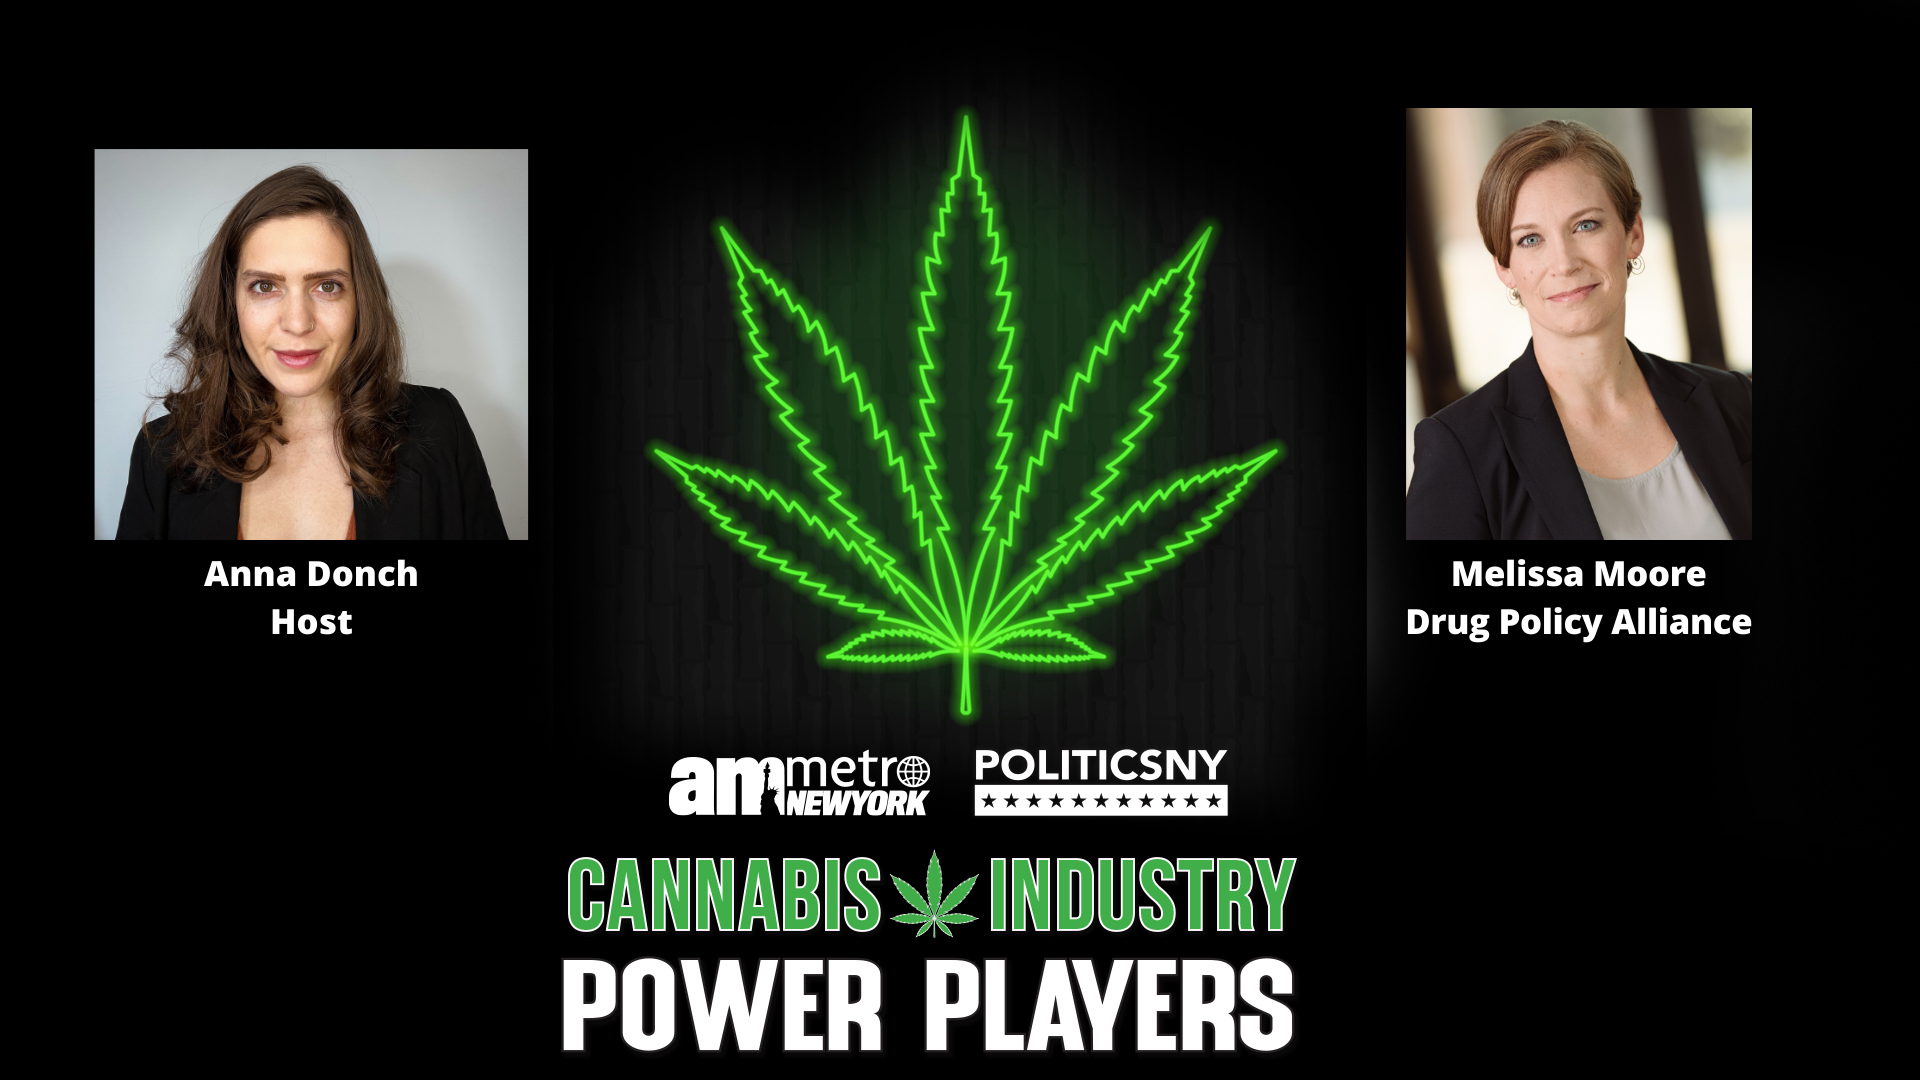 Cannabis Industry Power Players Meet Melissa Moore Of The Drug Policy Alliance